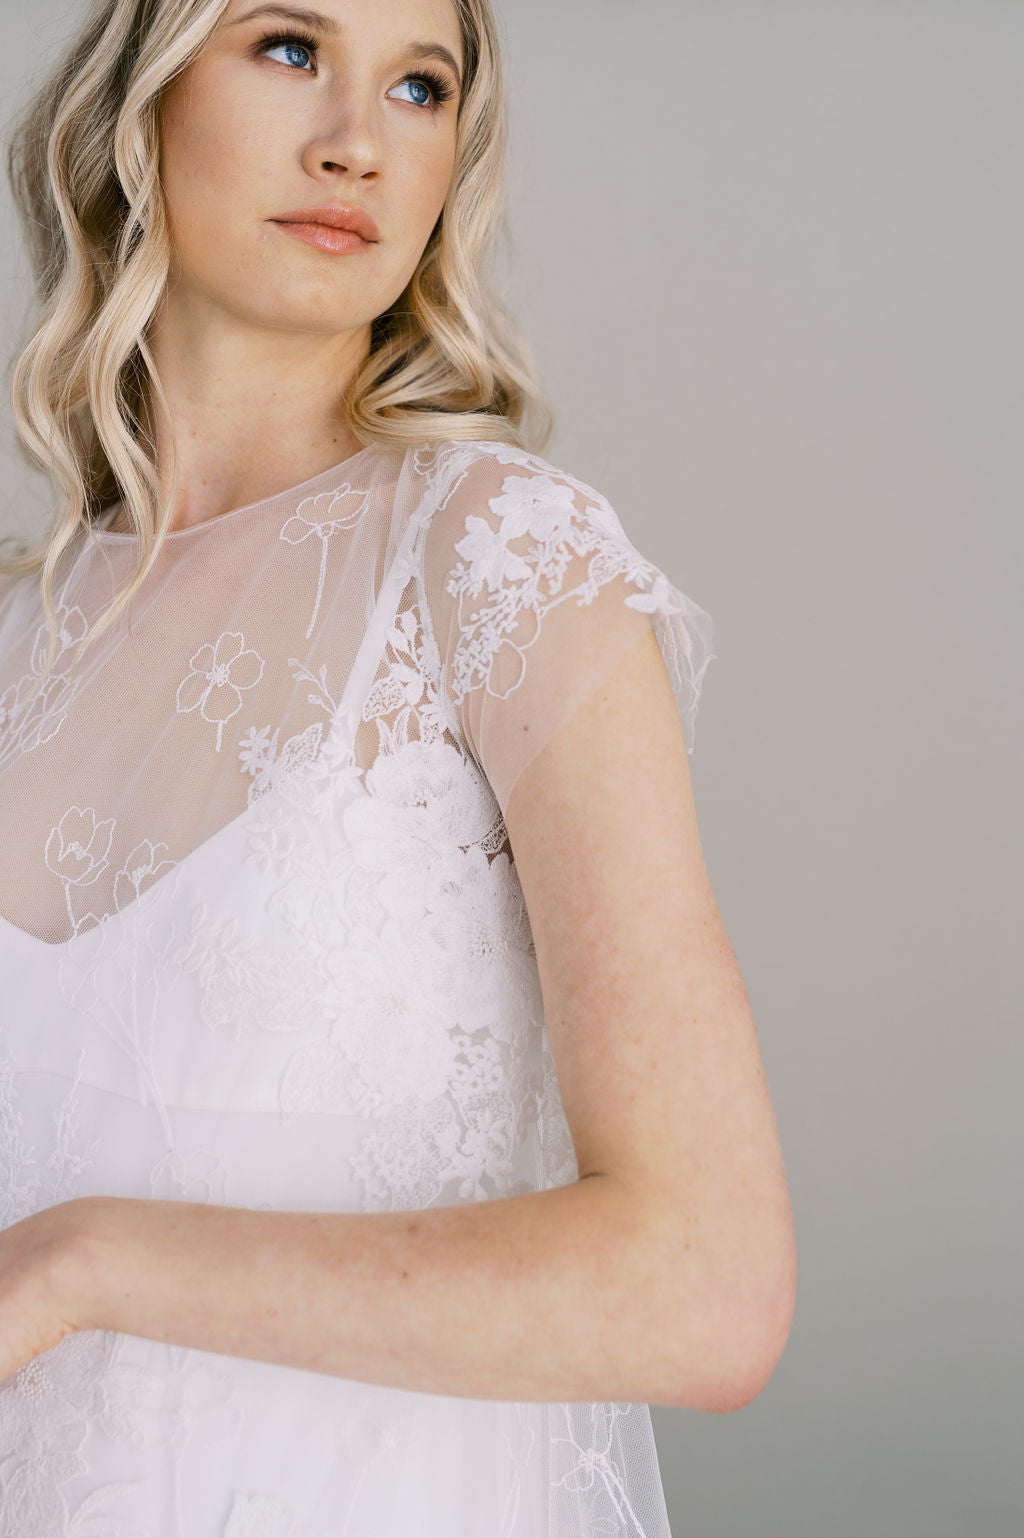 Short cotton boho lace wedding dress. A line with cap sleeves and crepe slip. Handmade by Catherine Langlois,Toronto, Canada.